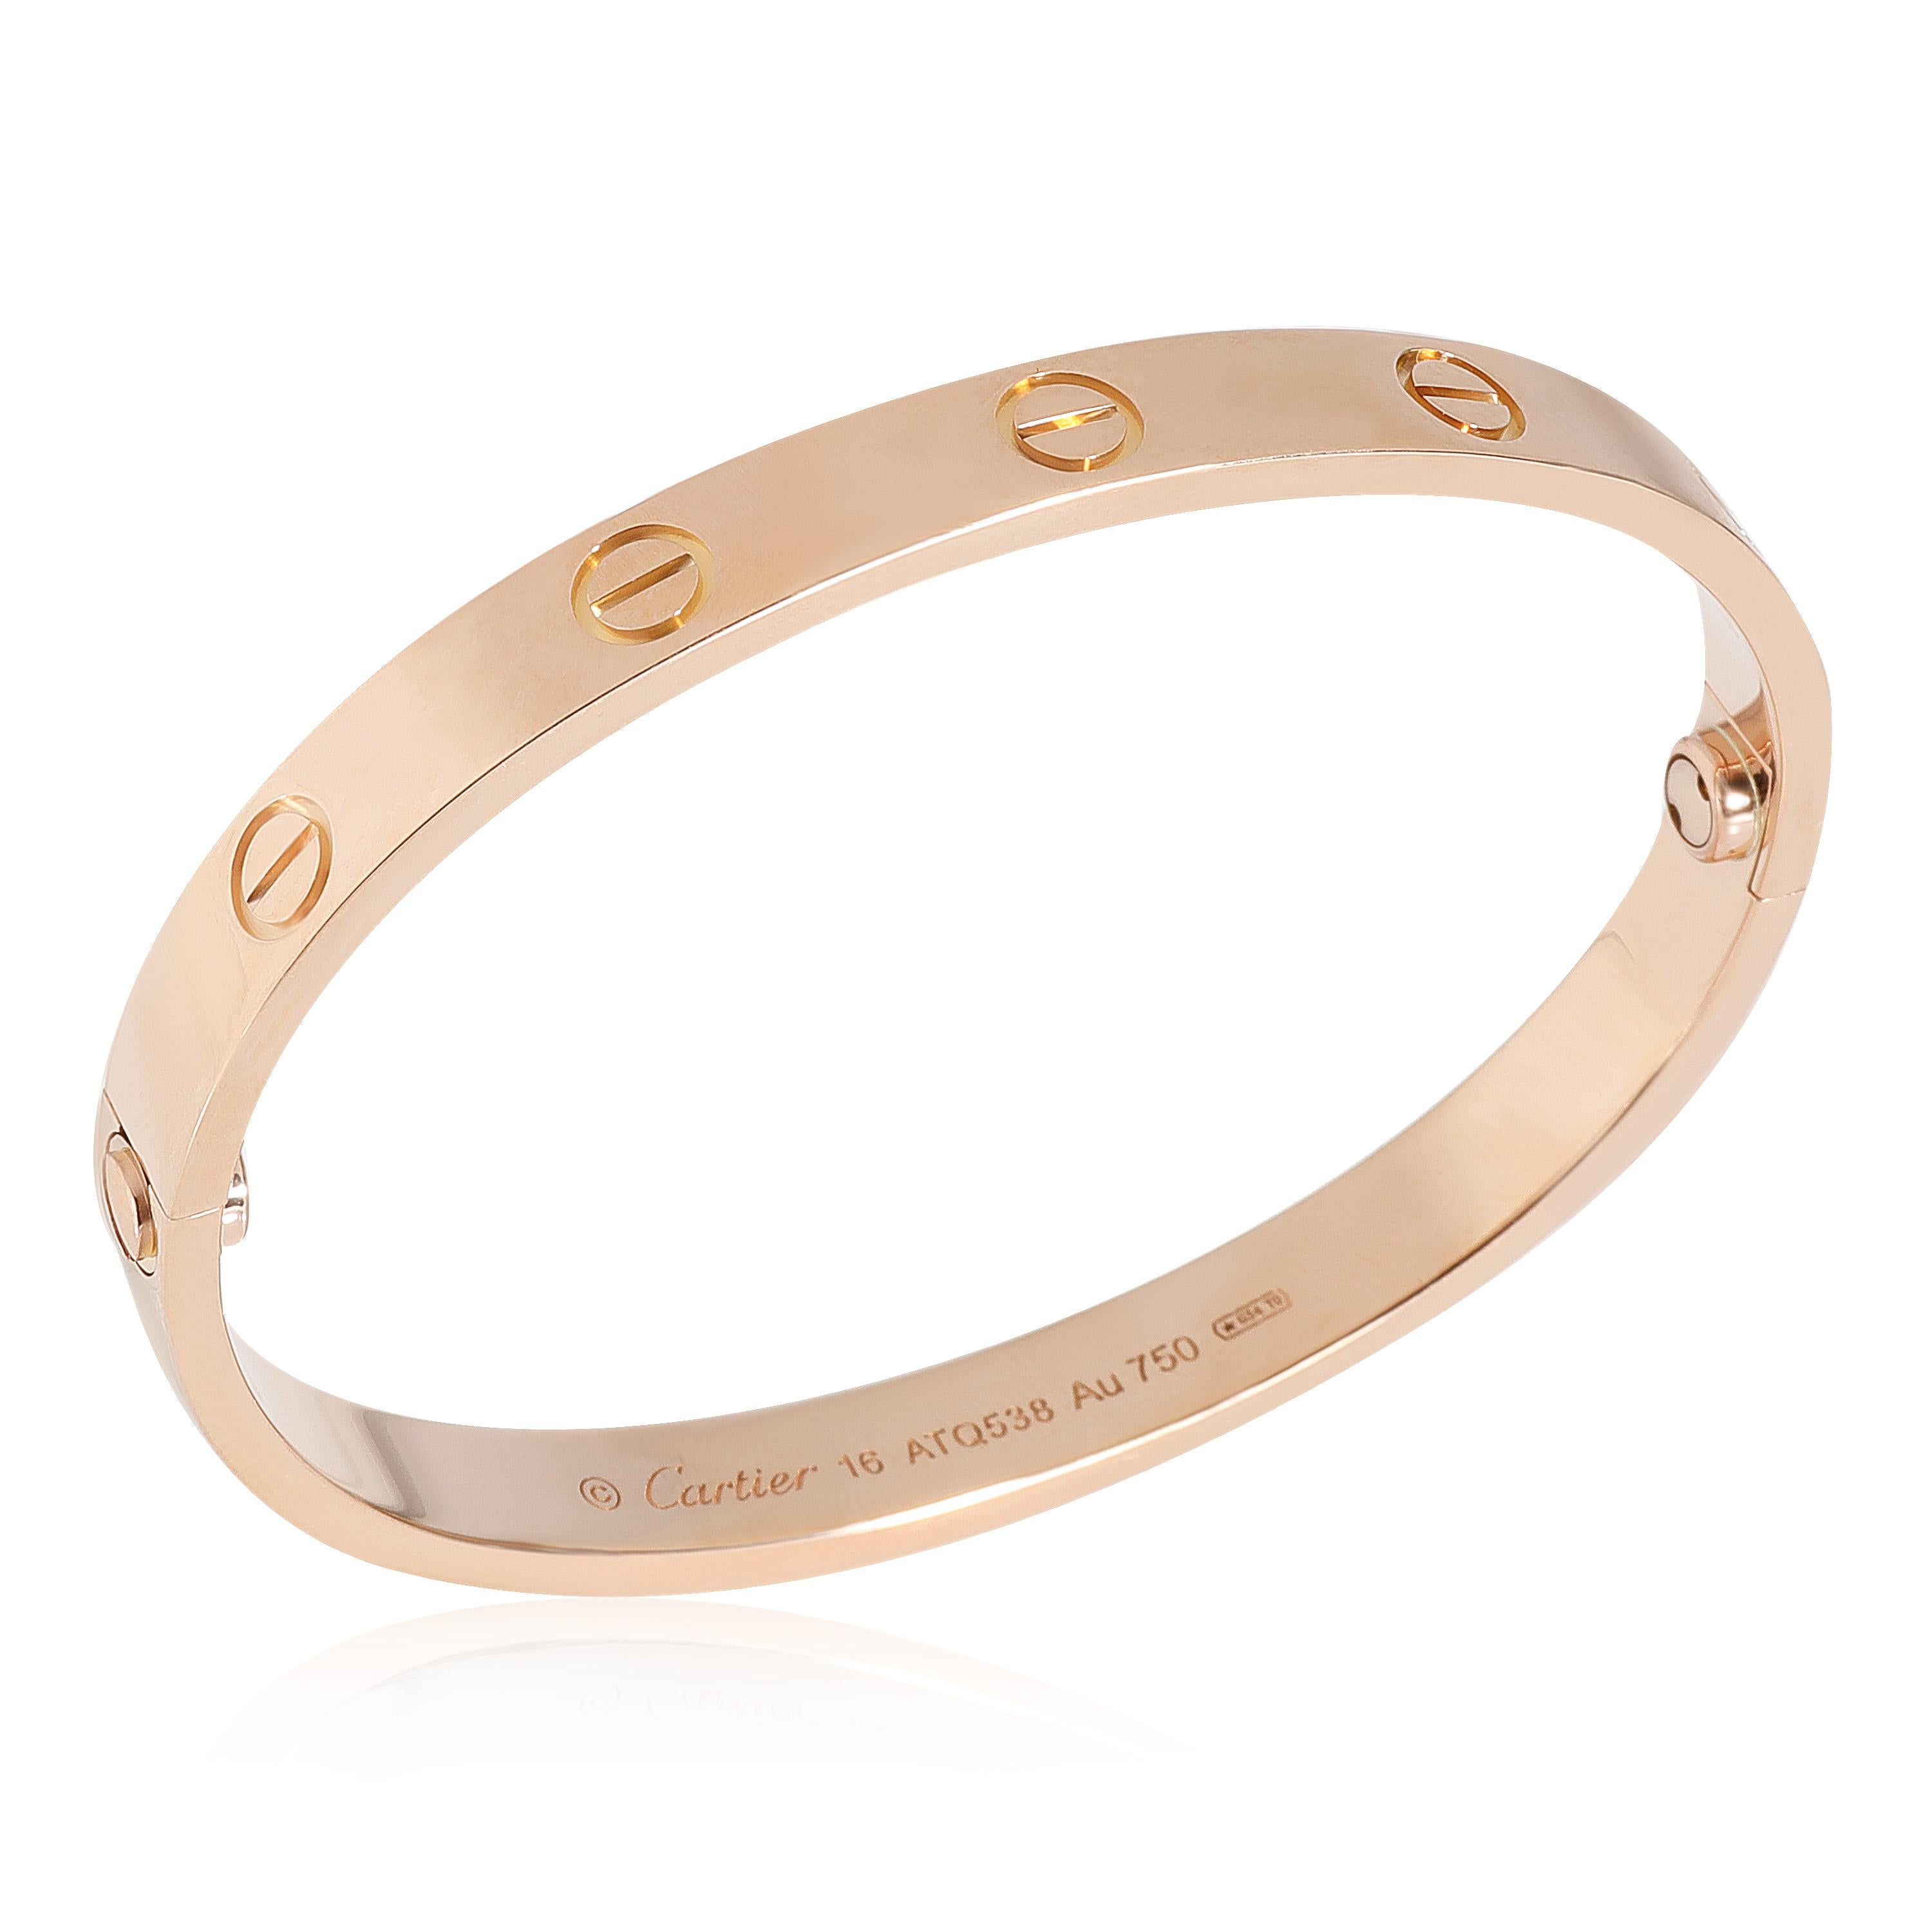 Cartier Love Bracelet in 18k Rose Gold

PRIMARY DETAILS
SKU: 123288
Listing Title: Cartier Love Bracelet in 18k Rose Gold
Condition Description: Retails for 6900 USD. In excellent condition and recently polished. 16 inches in length. Comes with